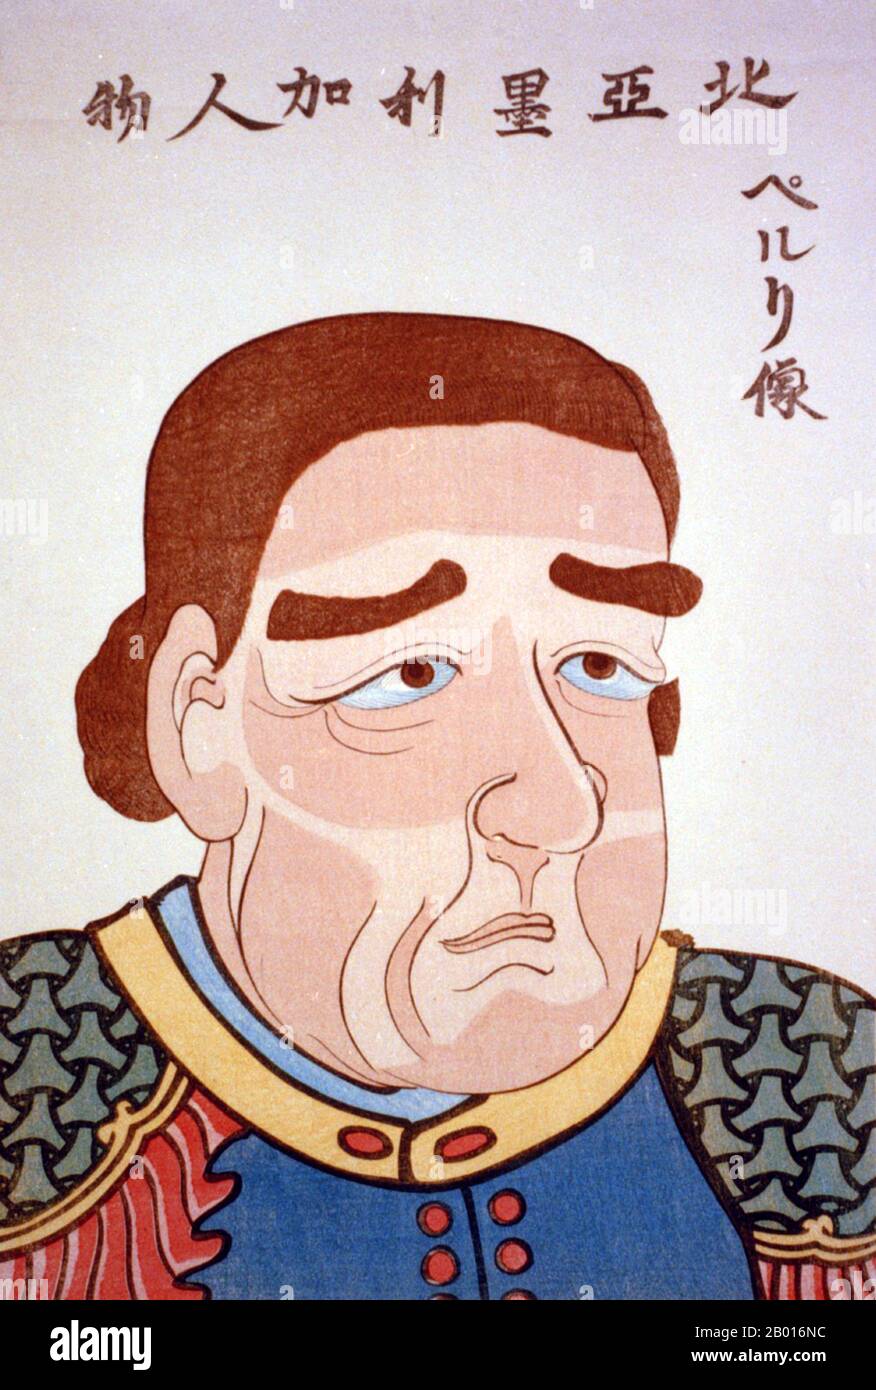 USA/Japan: Commodore Matthew Calbraith Perry (10 April 1794 - 4 March 1858). Ukiyo-e woodblock print, c. 1854.  Matthew Calbraith Perry was a Commodore of the U.S. Navy who compelled the opening of Japan to the West with the Convention of Kanagawa in 1854, when he threatened to bombard Edo (Tokyo) with his ships should they resist. Perry had commanded ships in several wars, including the War of 1812 and the Mexican-American War (1846-1848). His advocacy for the modernisation of the U.S. Navy led to him being called 'The Father of the Steam Navy'. Stock Photo